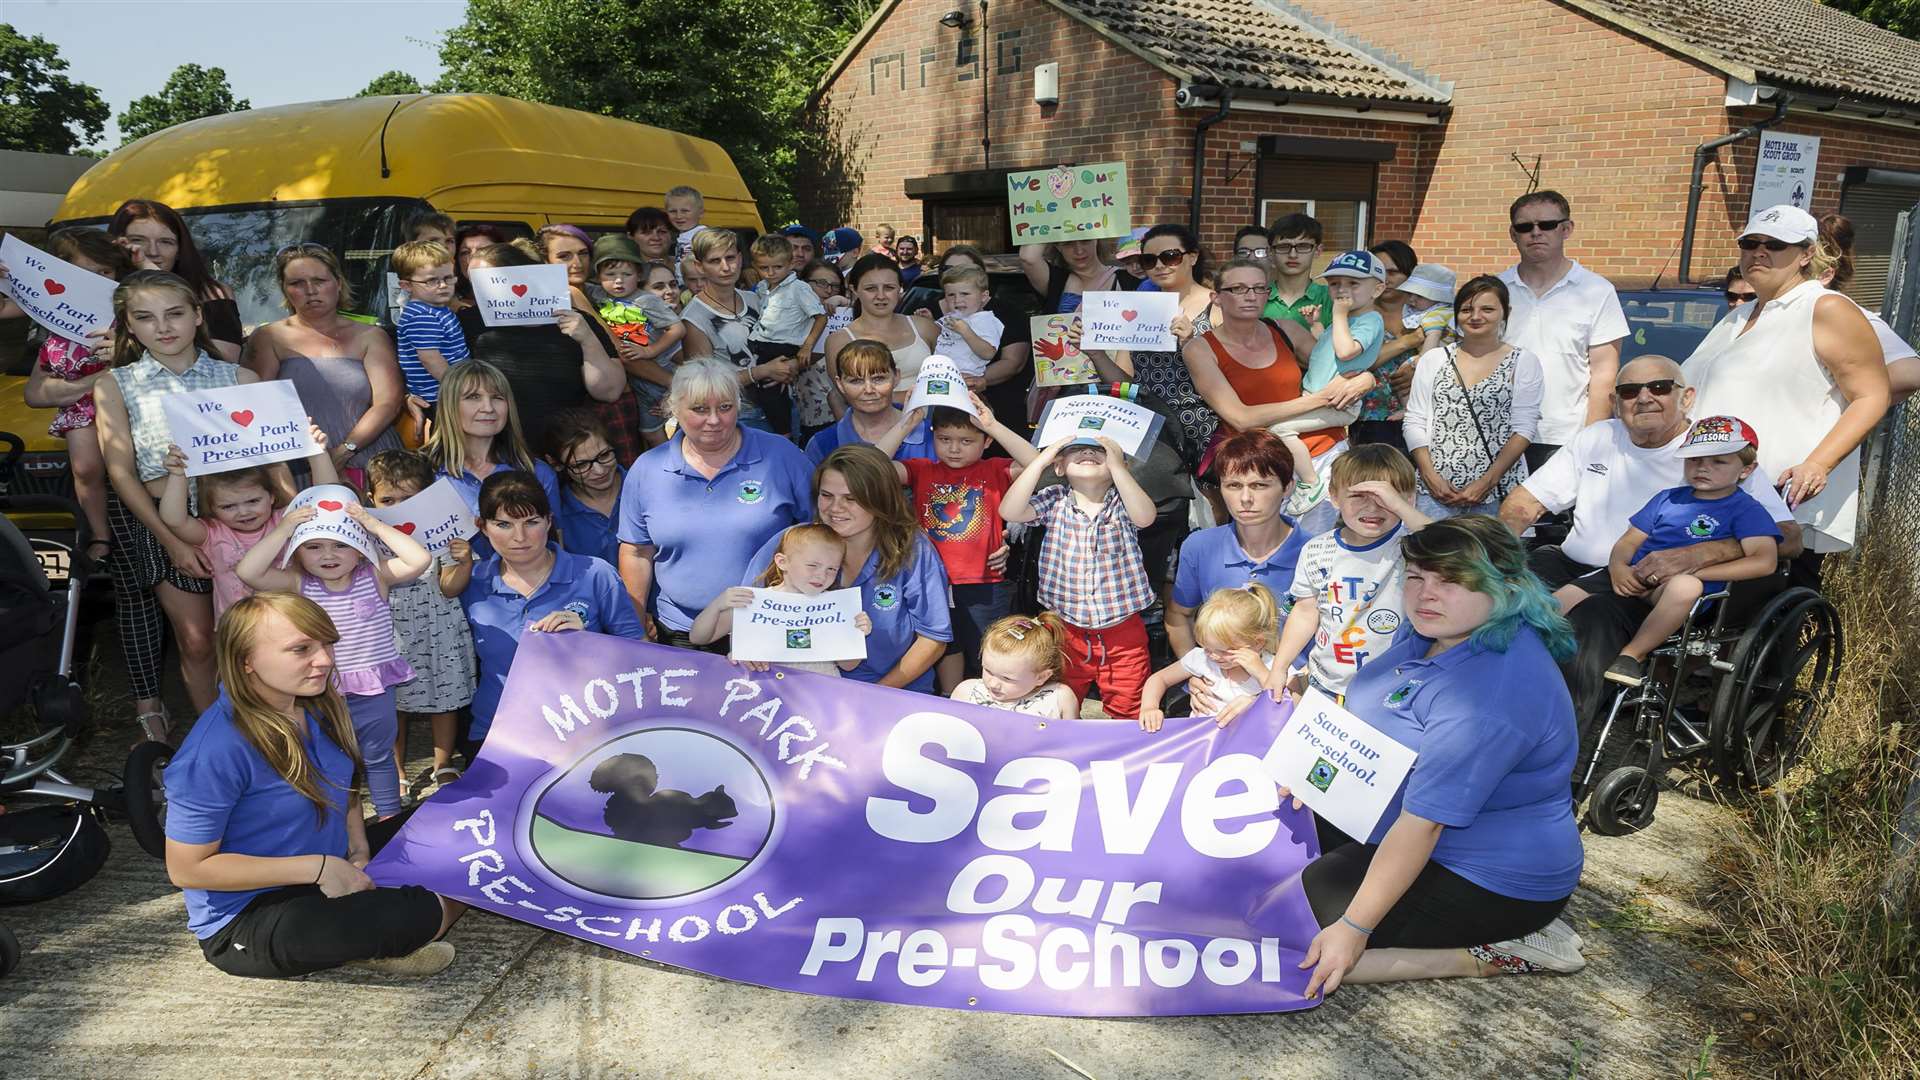 Unhappy staff, parents and children at the pre-school